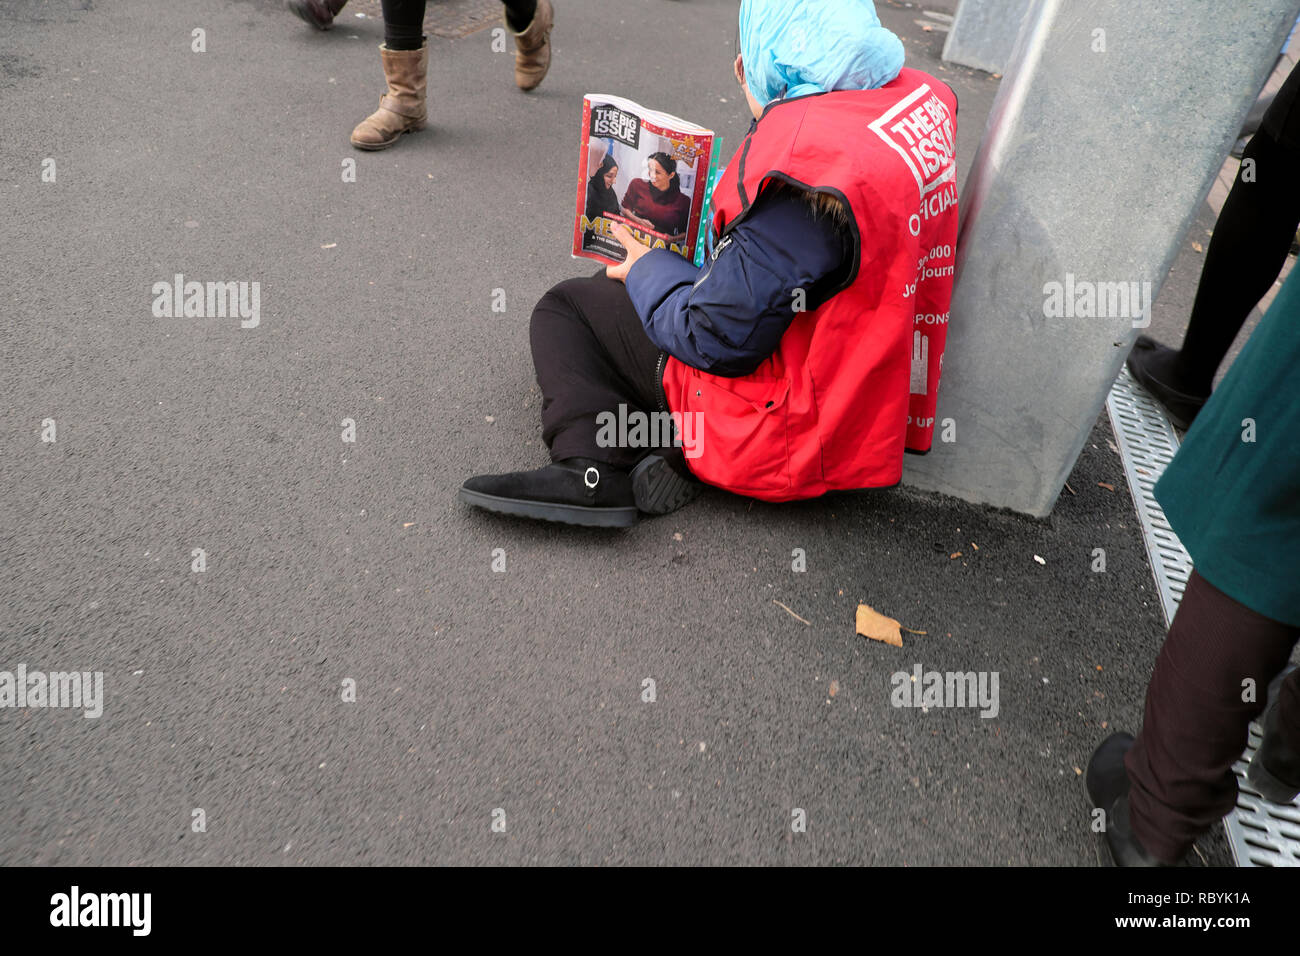 An older woman Big Issue magazine vendor sitting on the pavement selling magazines Meghan Markle on front cover in London England UK  KATHY DEWITT Stock Photo